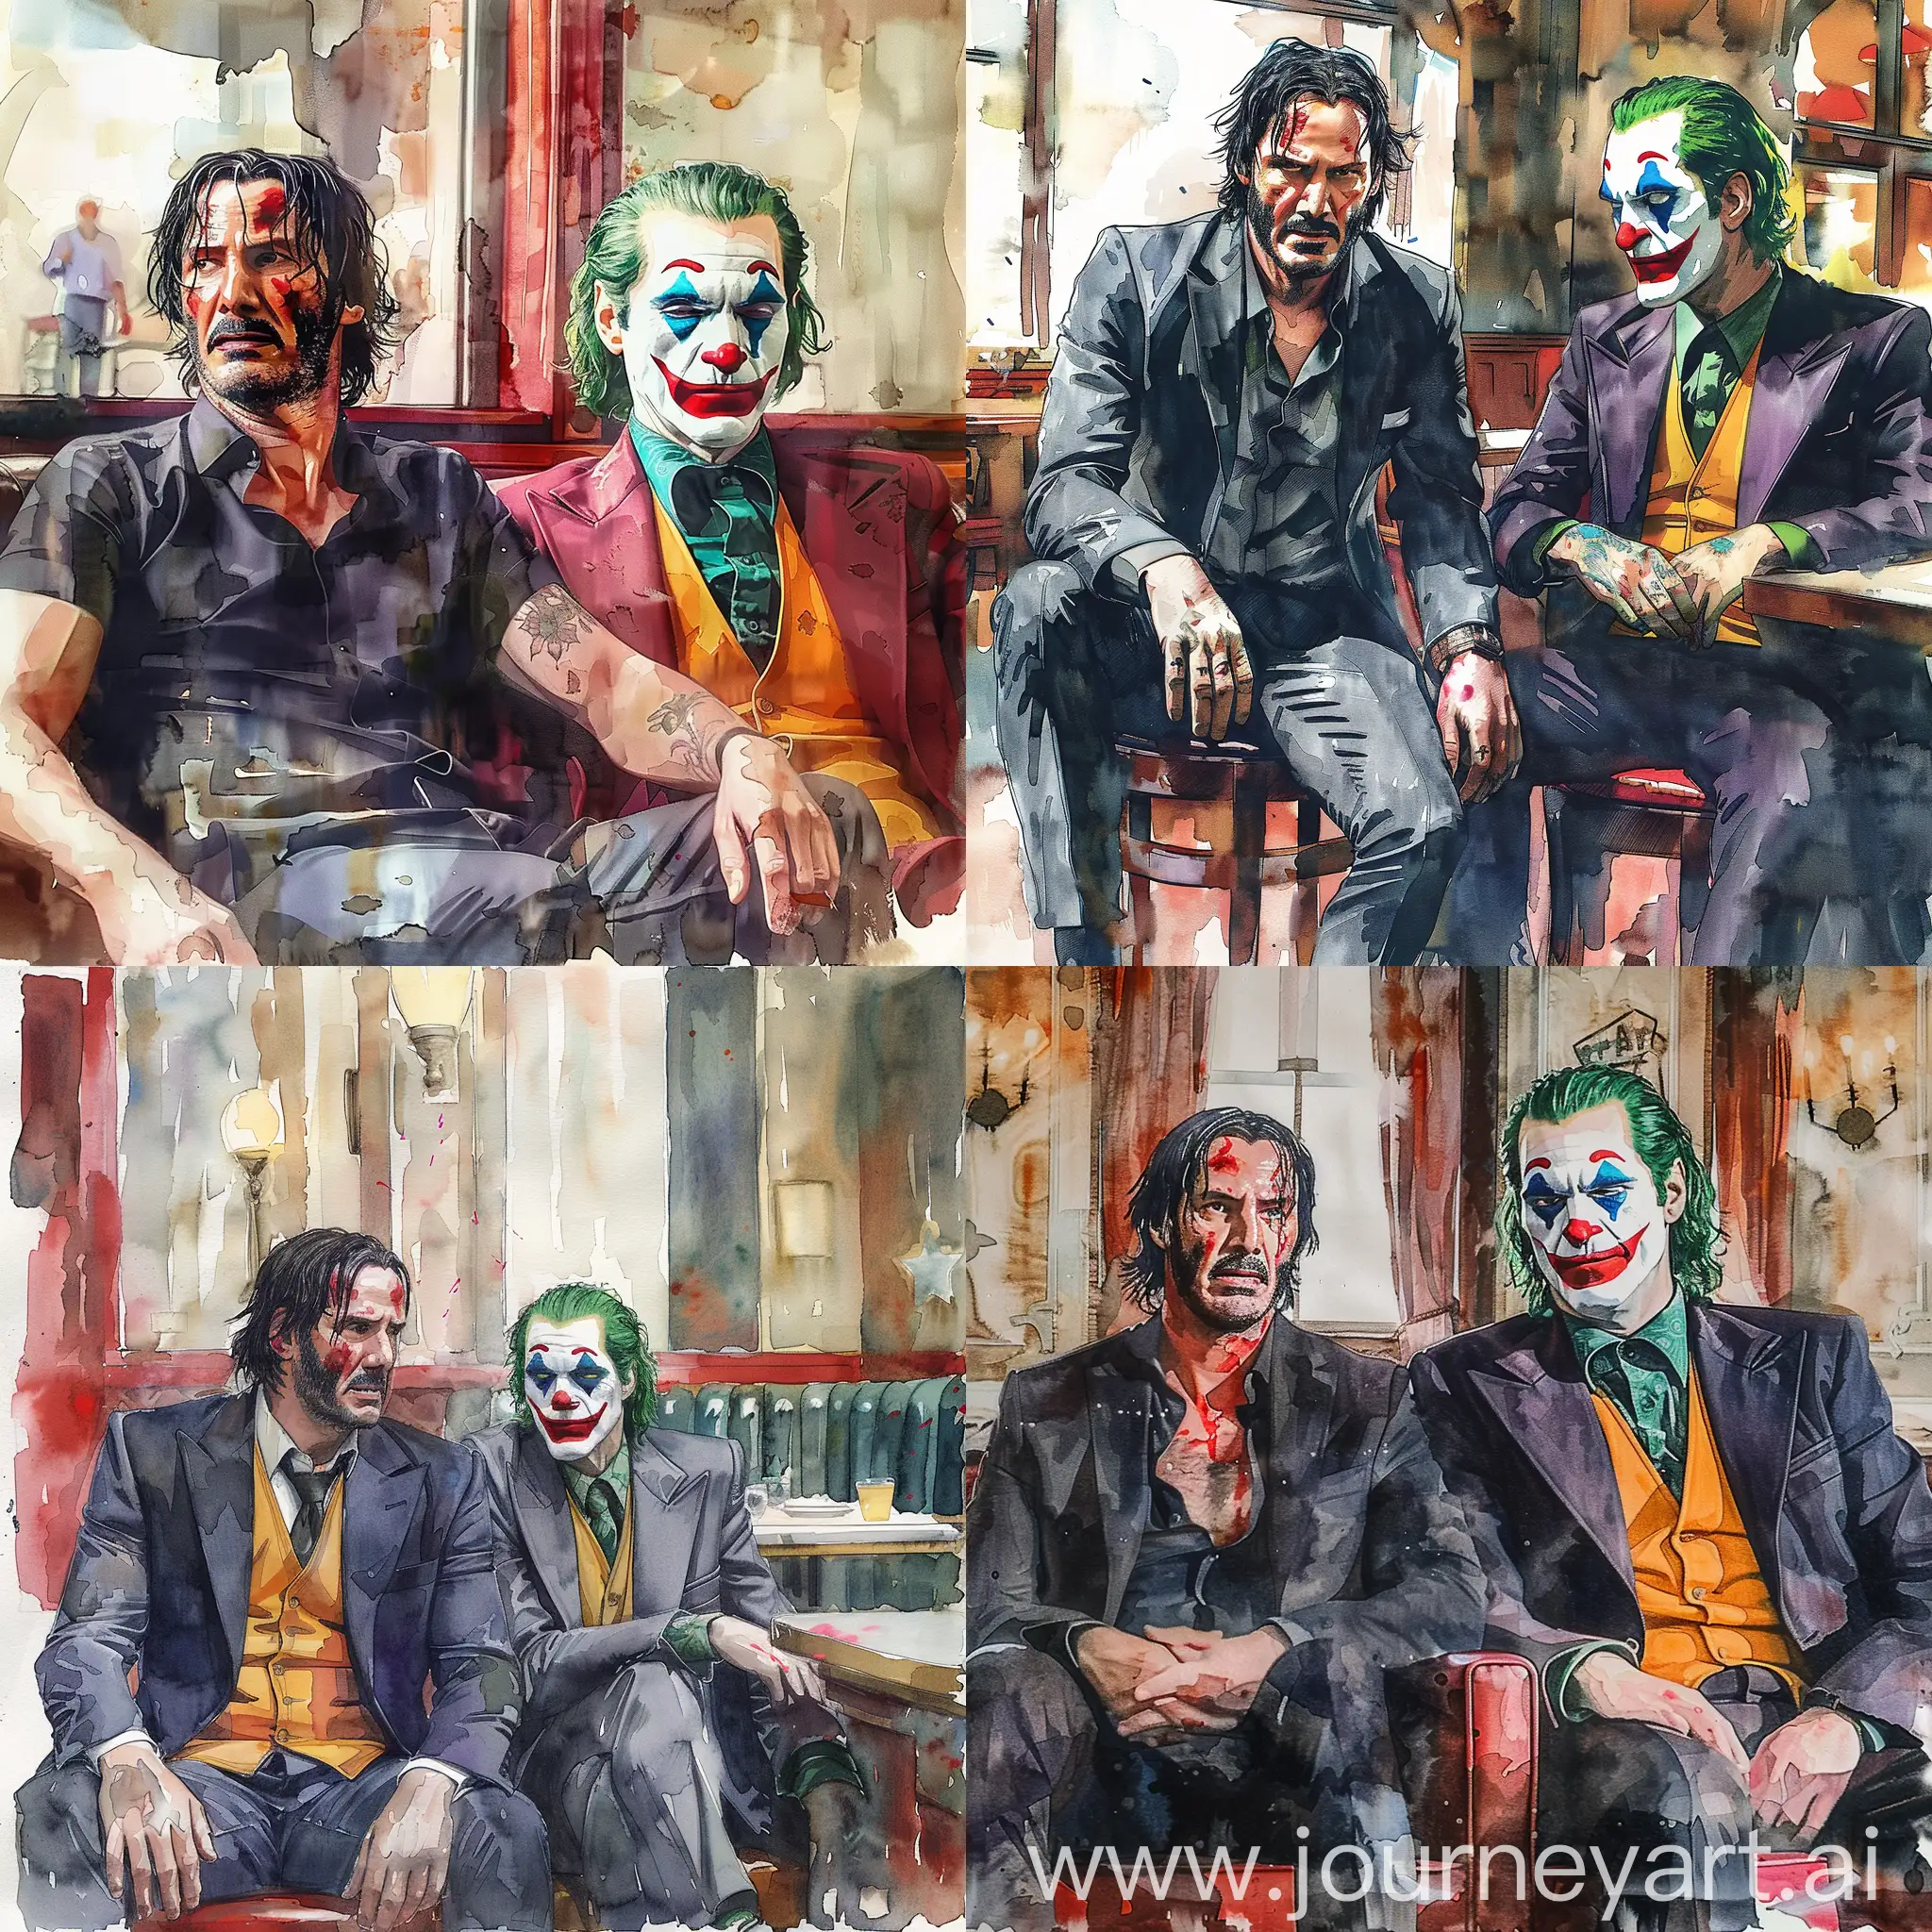 John-Wick-and-the-Joker-Dine-Together-Watercolor-Style-Restaurant-Scene